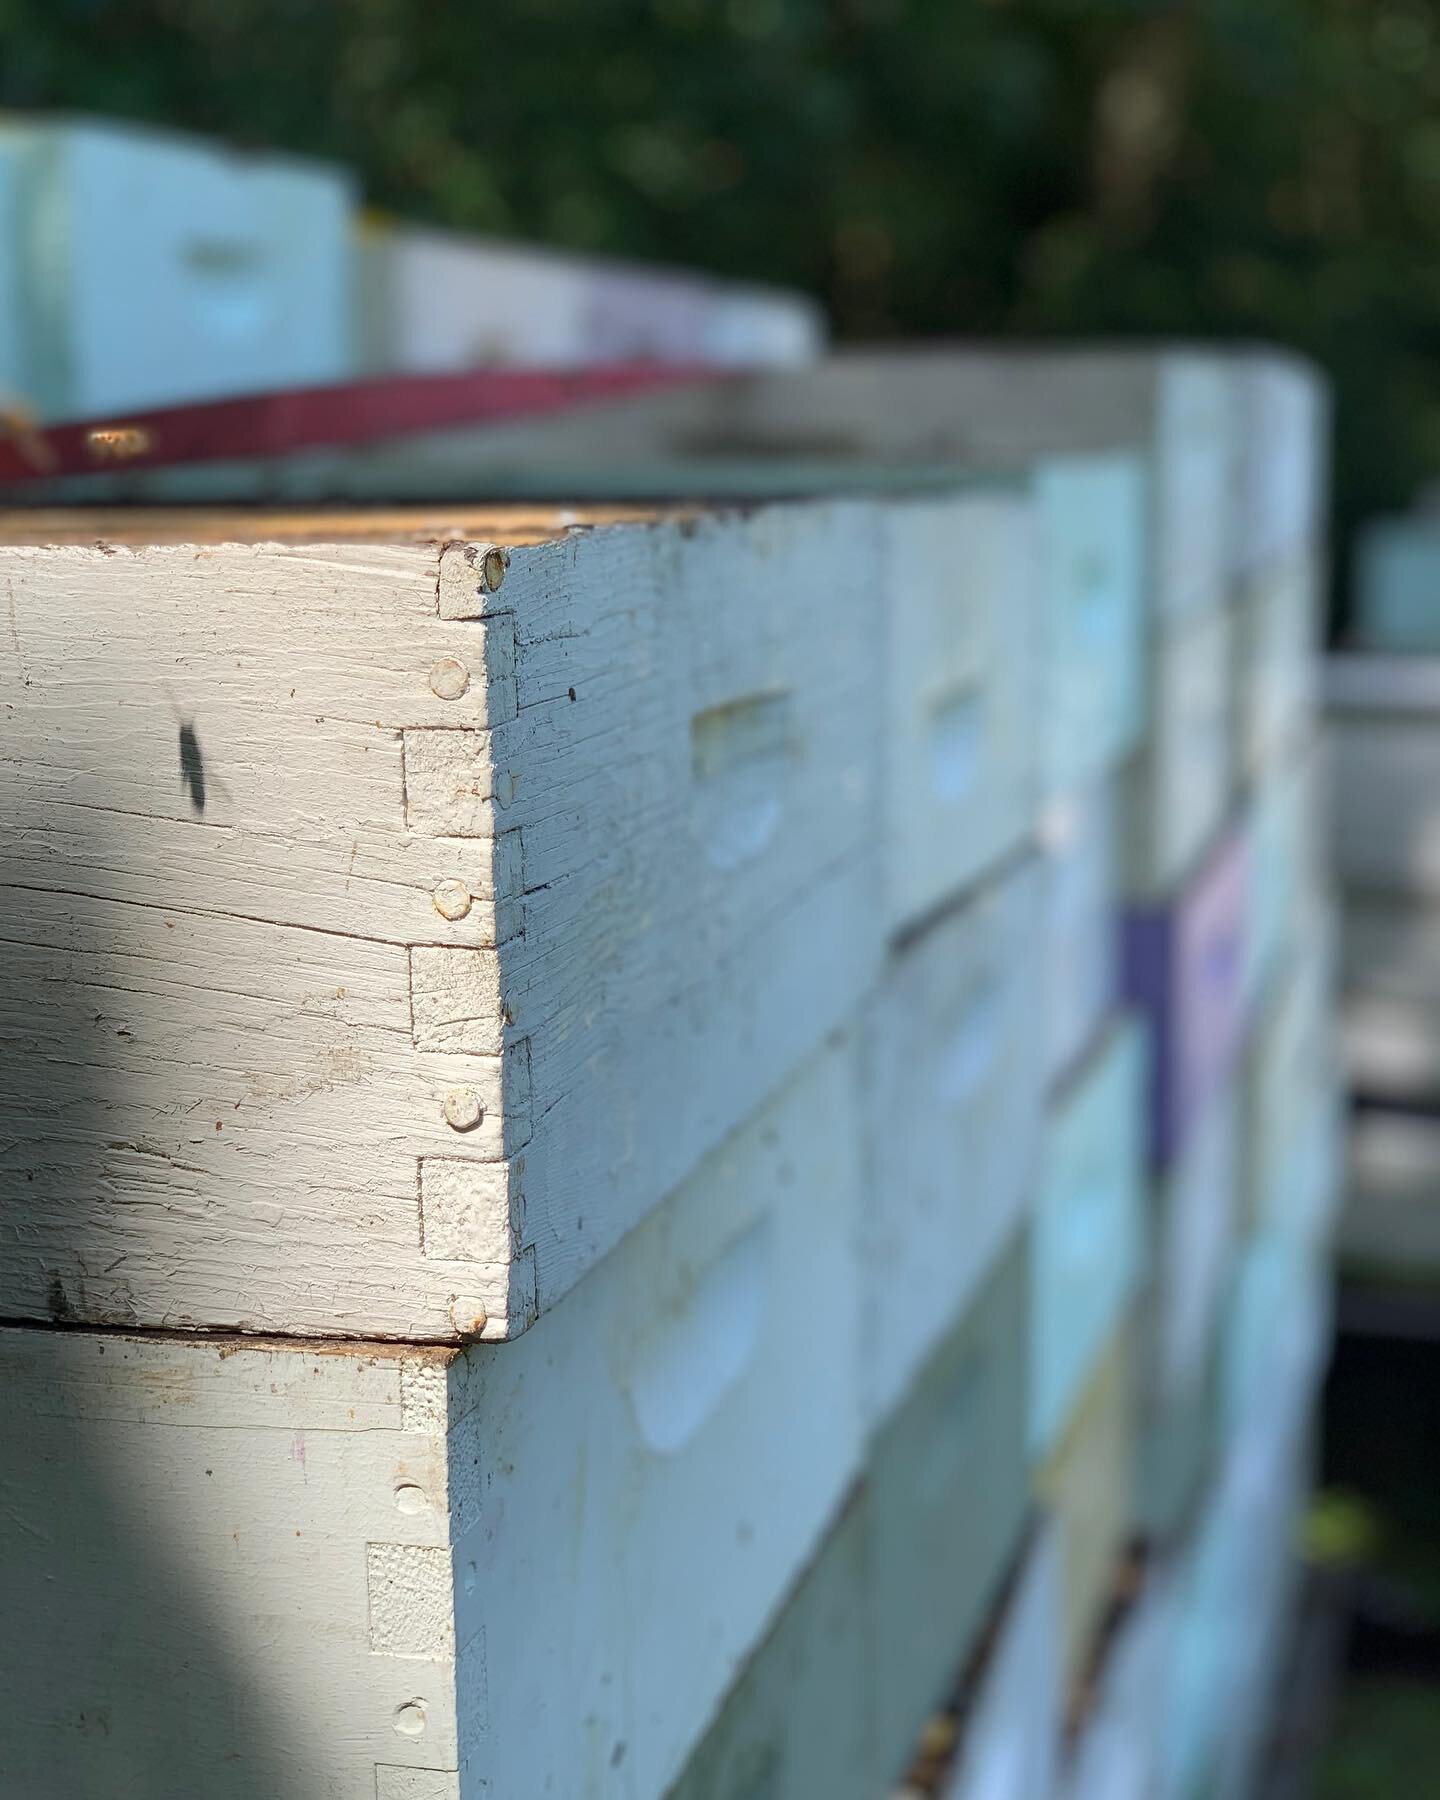 It&rsquo;s that time of the year for us beekeepers here in St. Augustine. Long hours in 90+ degree weather pulling our honey, sleepless nights extracting, day after day&hellip; but so worth it! Huge thank you to Joey for being a super human this week